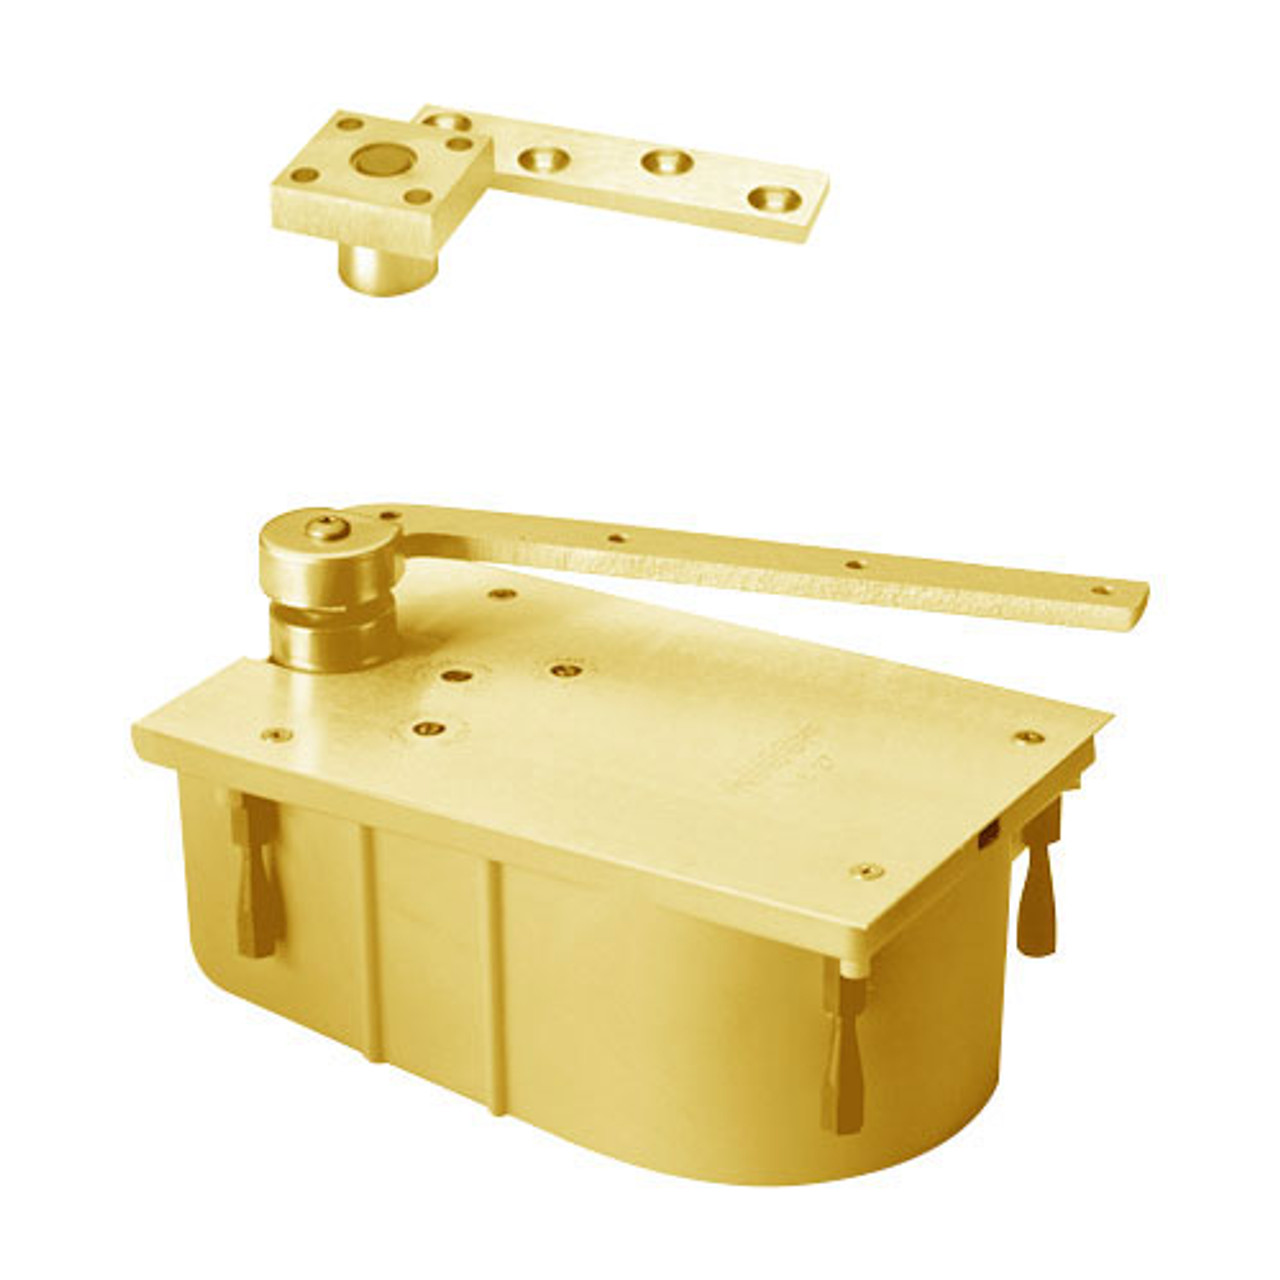 427-90S-LH-605 Rixson 427 Series Heavy Duty 3/4" Offset Hung Floor Closer in Bright Brass